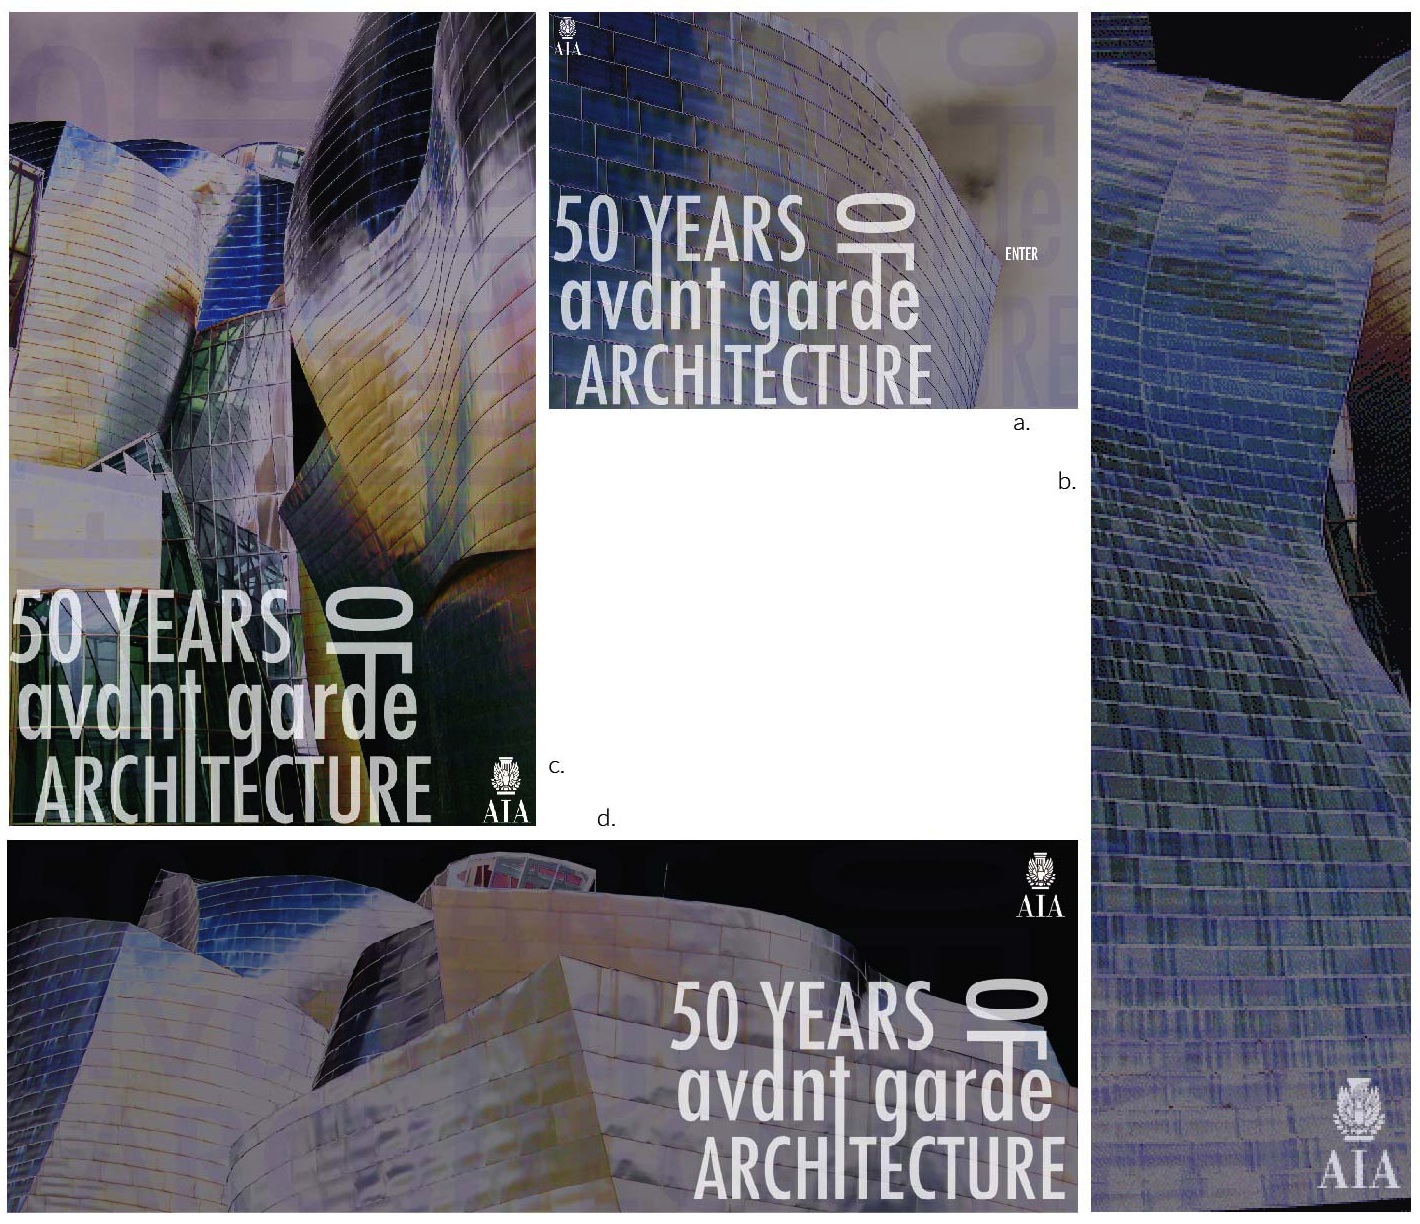 Celebrating 50 Years with AIA Advertising Campaign